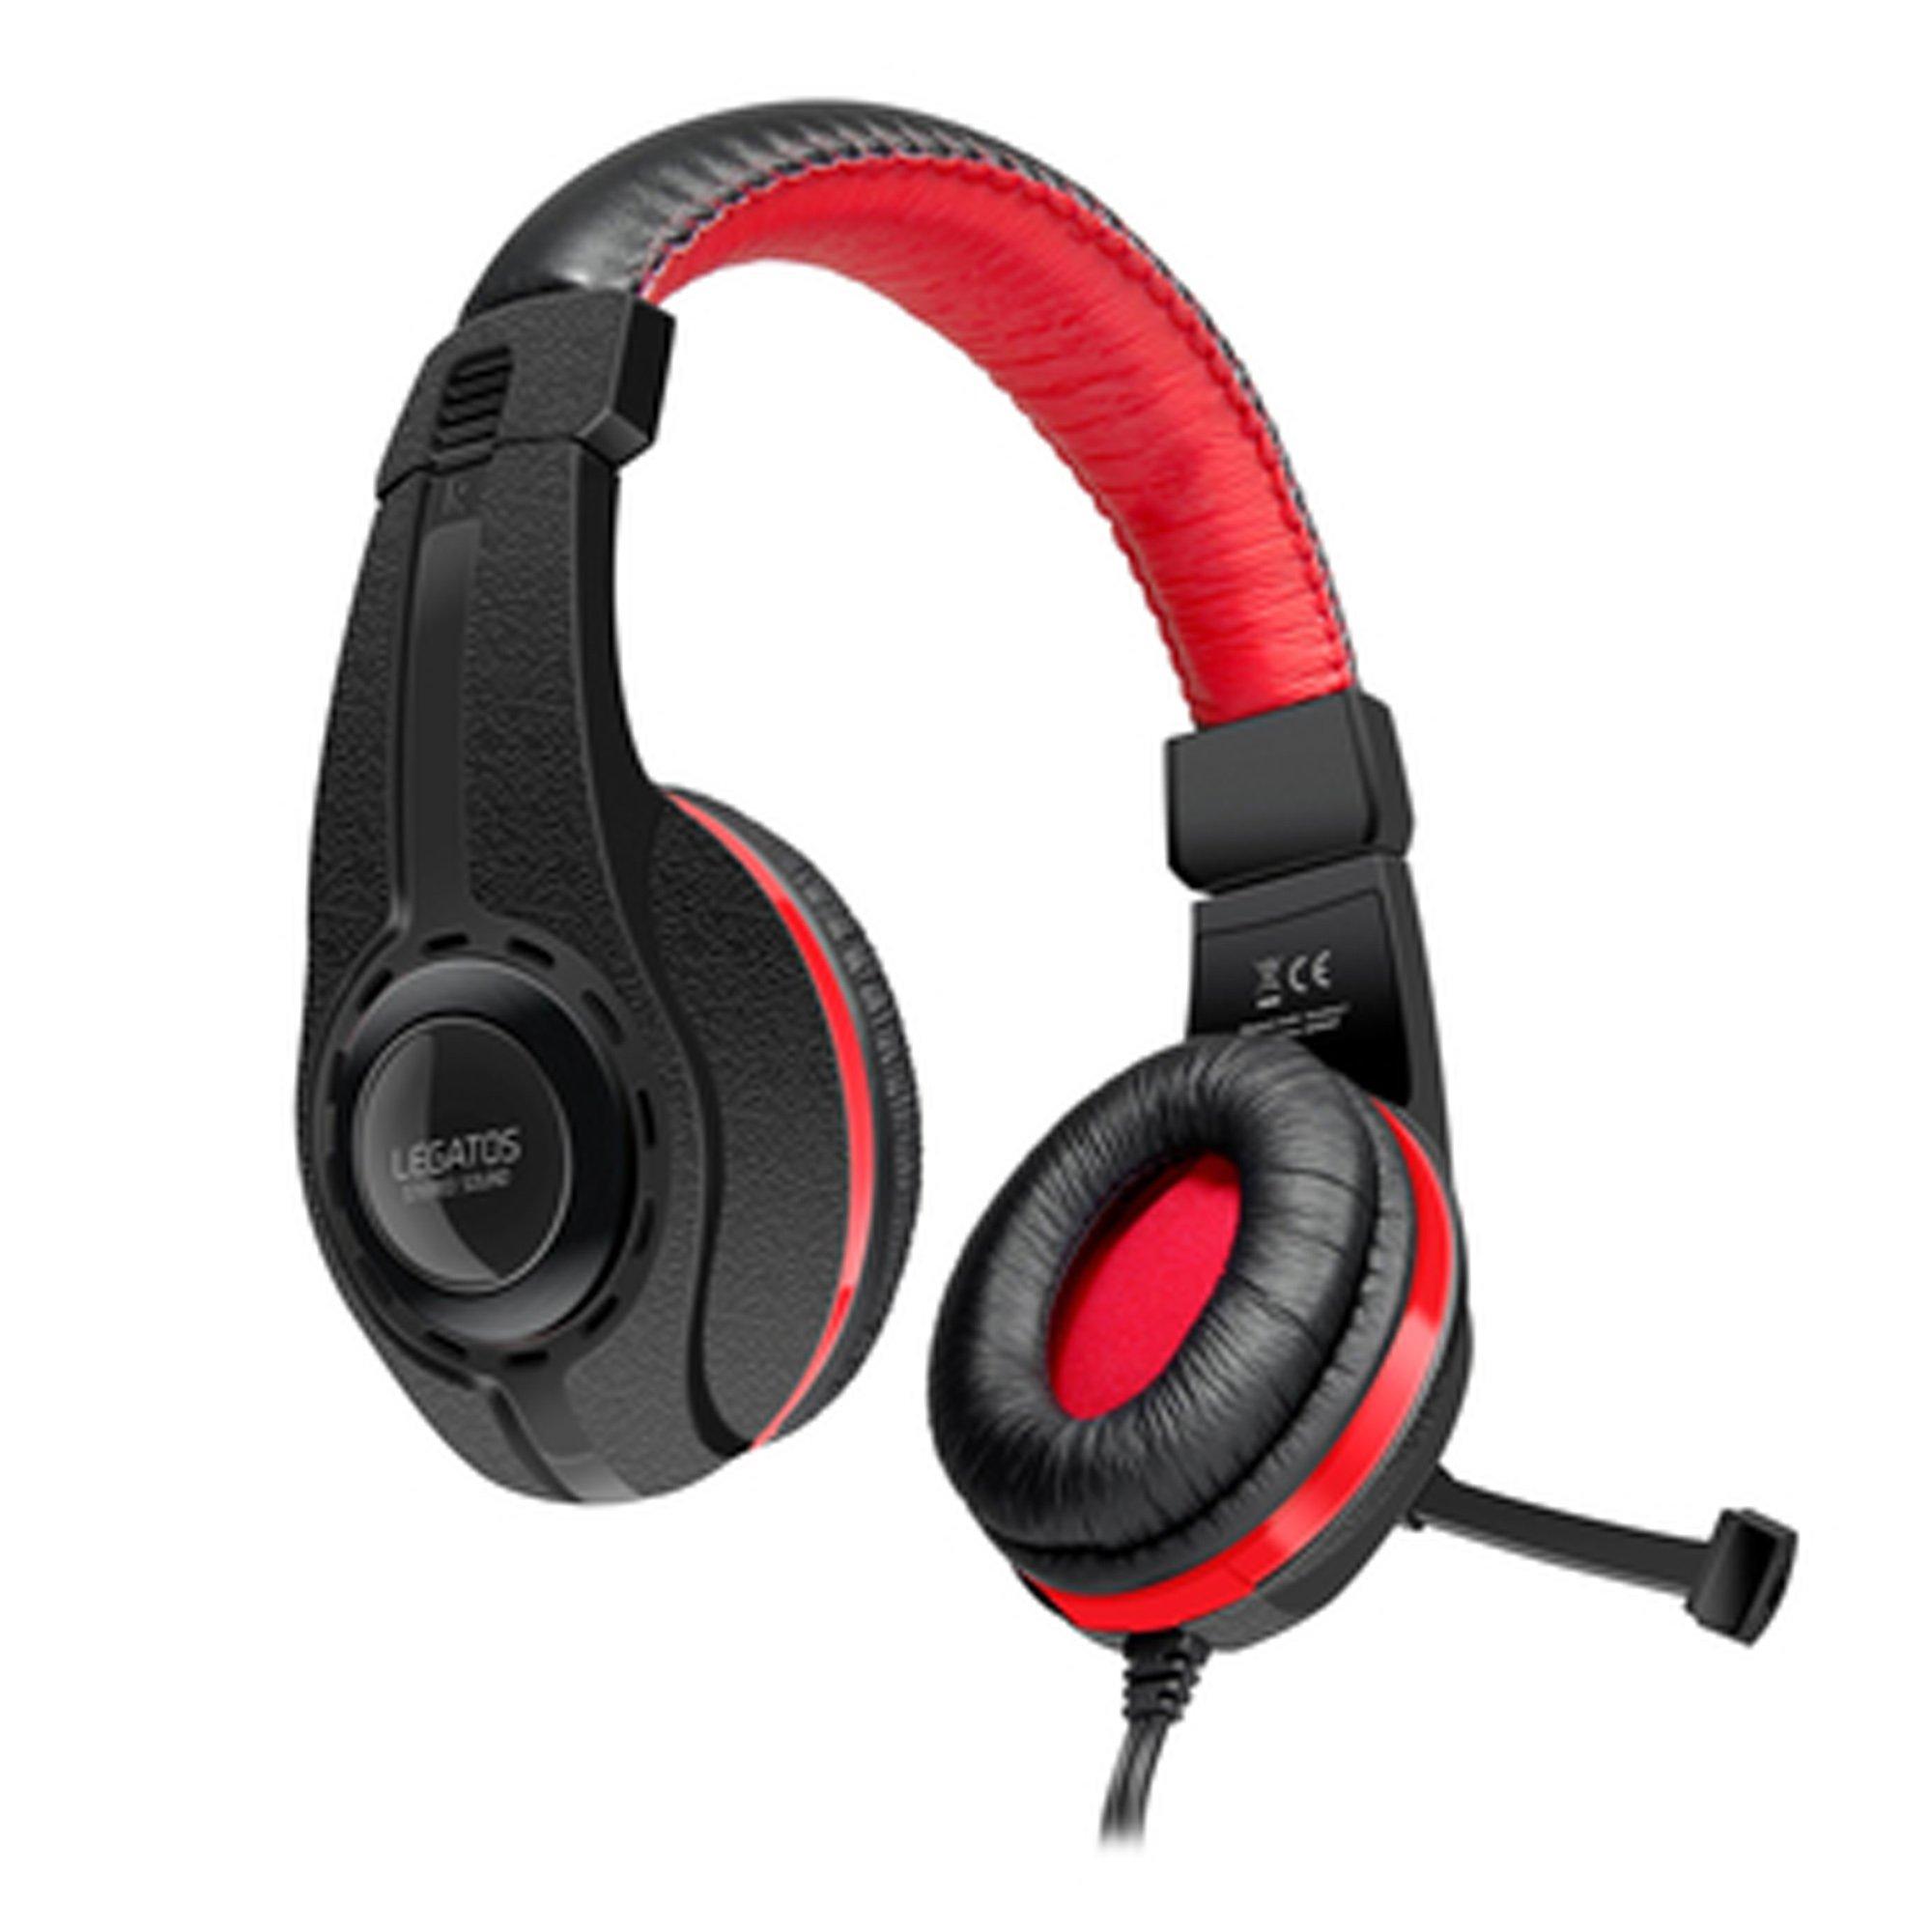 Image of SPEEDLINK Legatos Stereo for PS4 Gaming-Headset